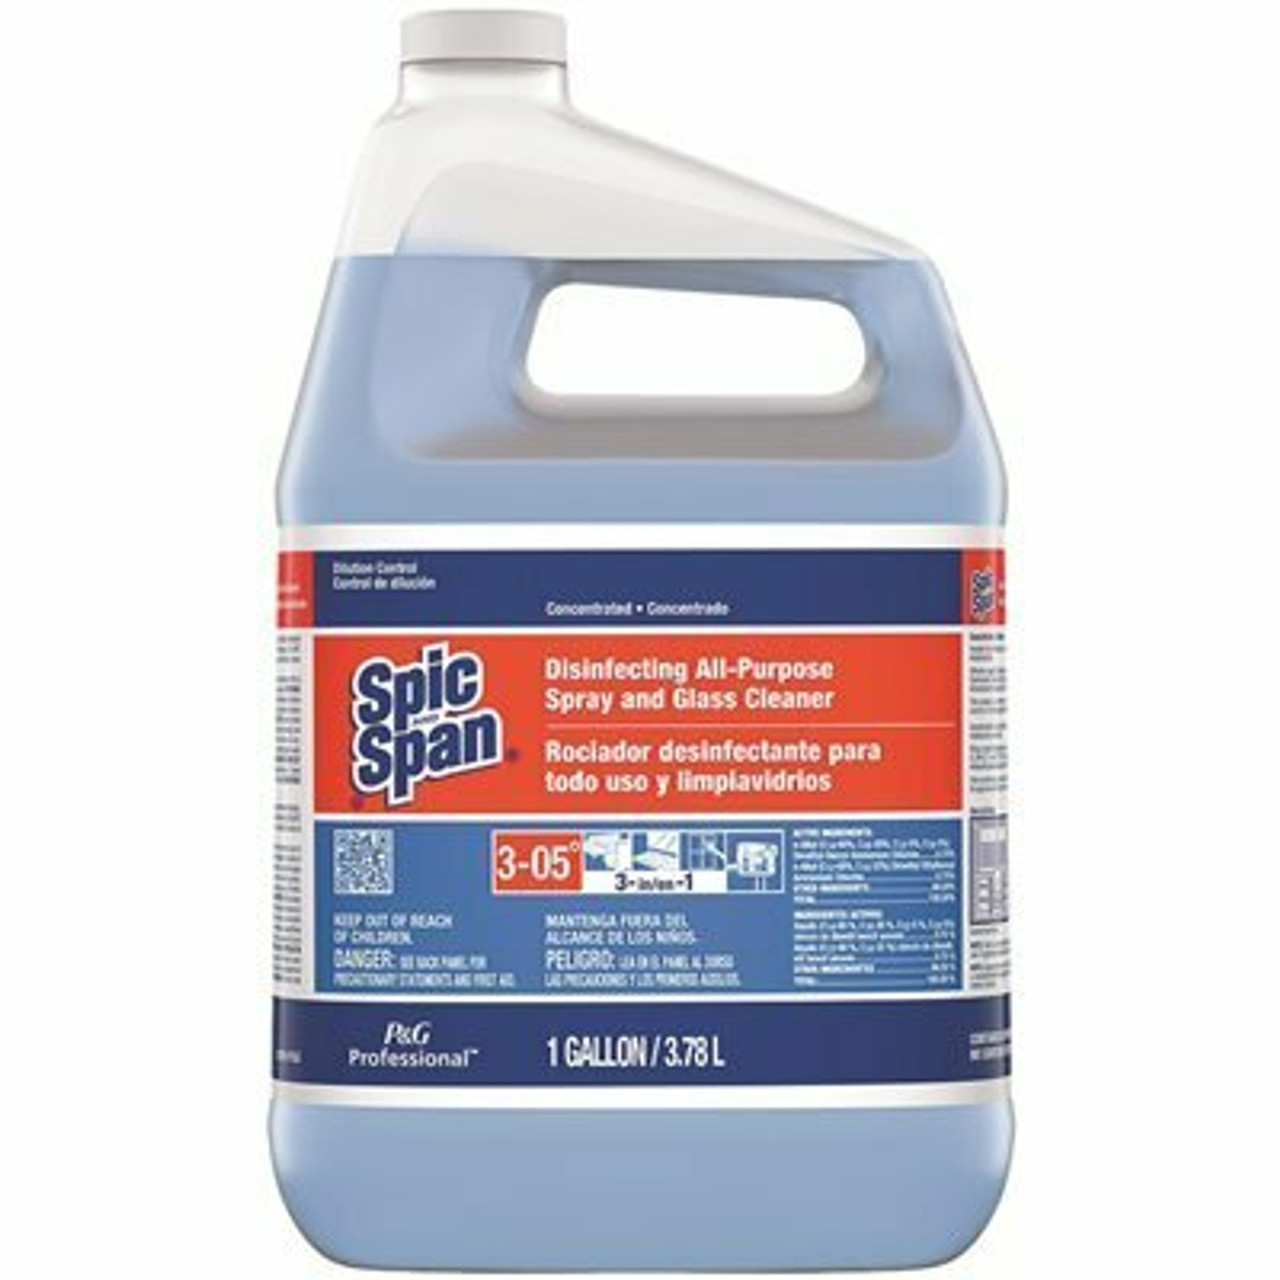 Spic And Span 1 Gal. Closed Loop Disinfecting All-Purpose Spray And Glass Cleaner Concentrate